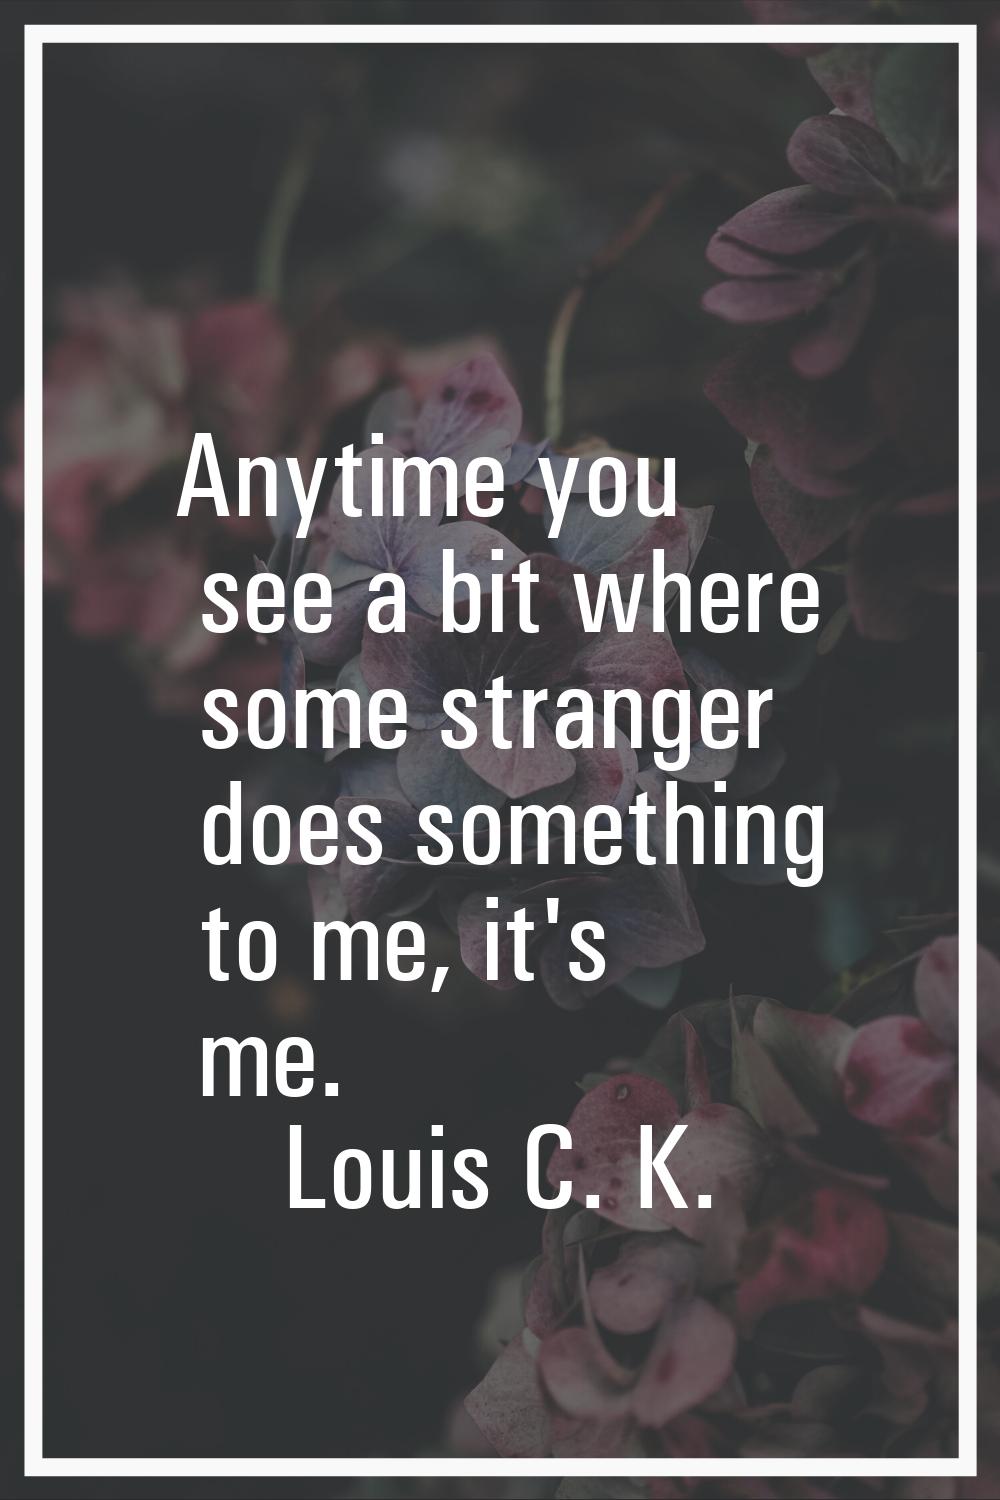 Anytime you see a bit where some stranger does something to me, it's me.